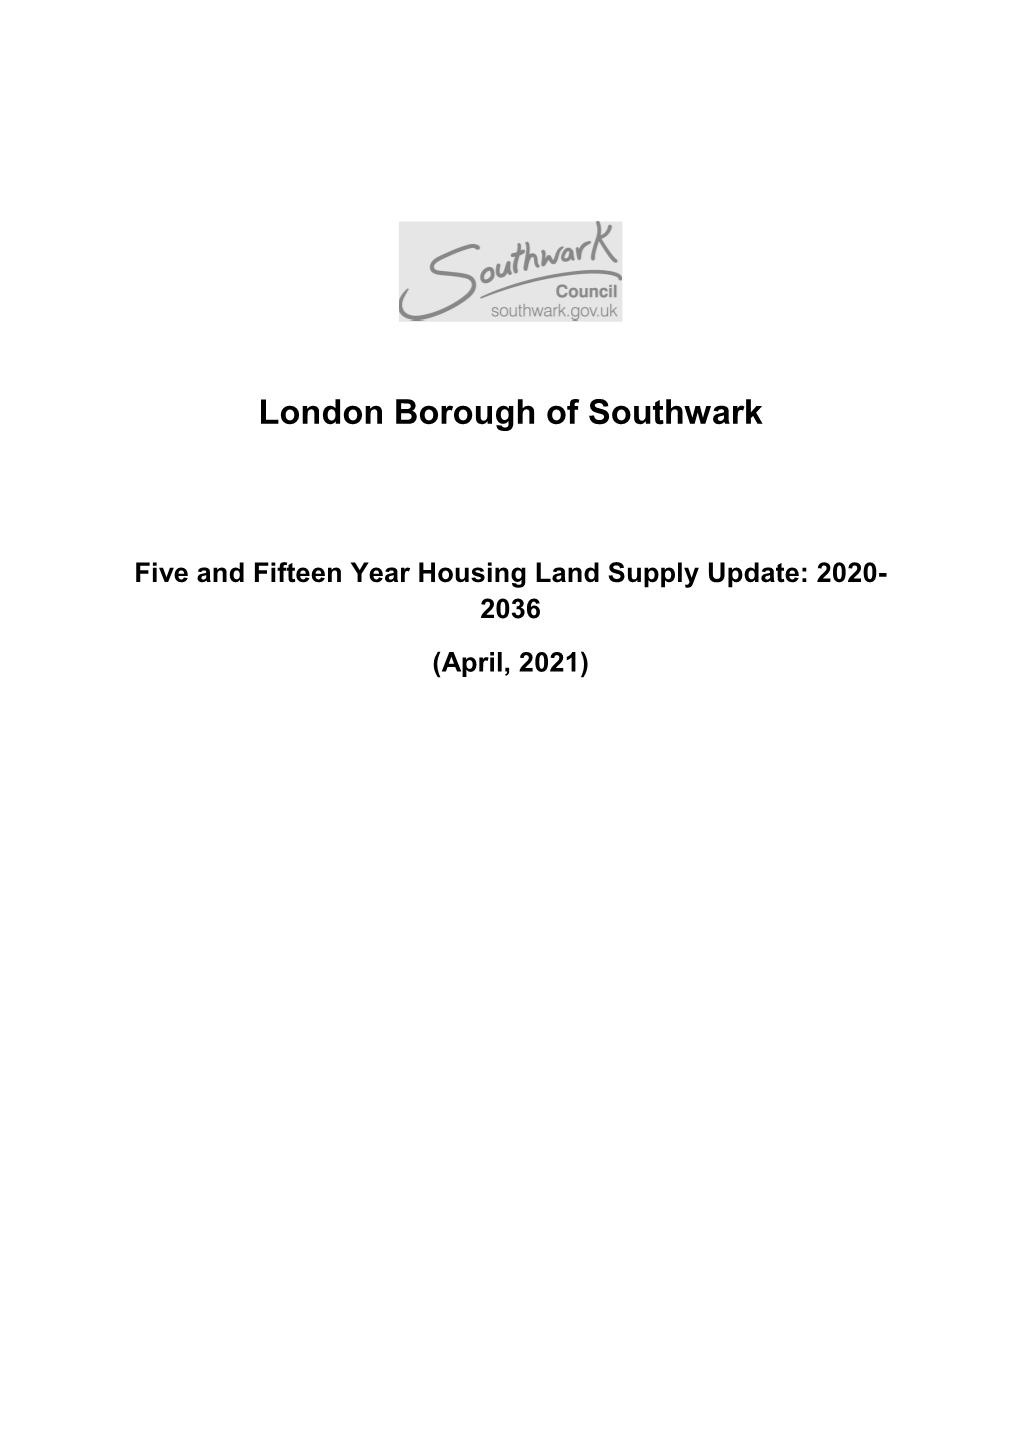 Five and Fifteen Year Housing Land Supply Update: 2020- 2036 (April, 2021)